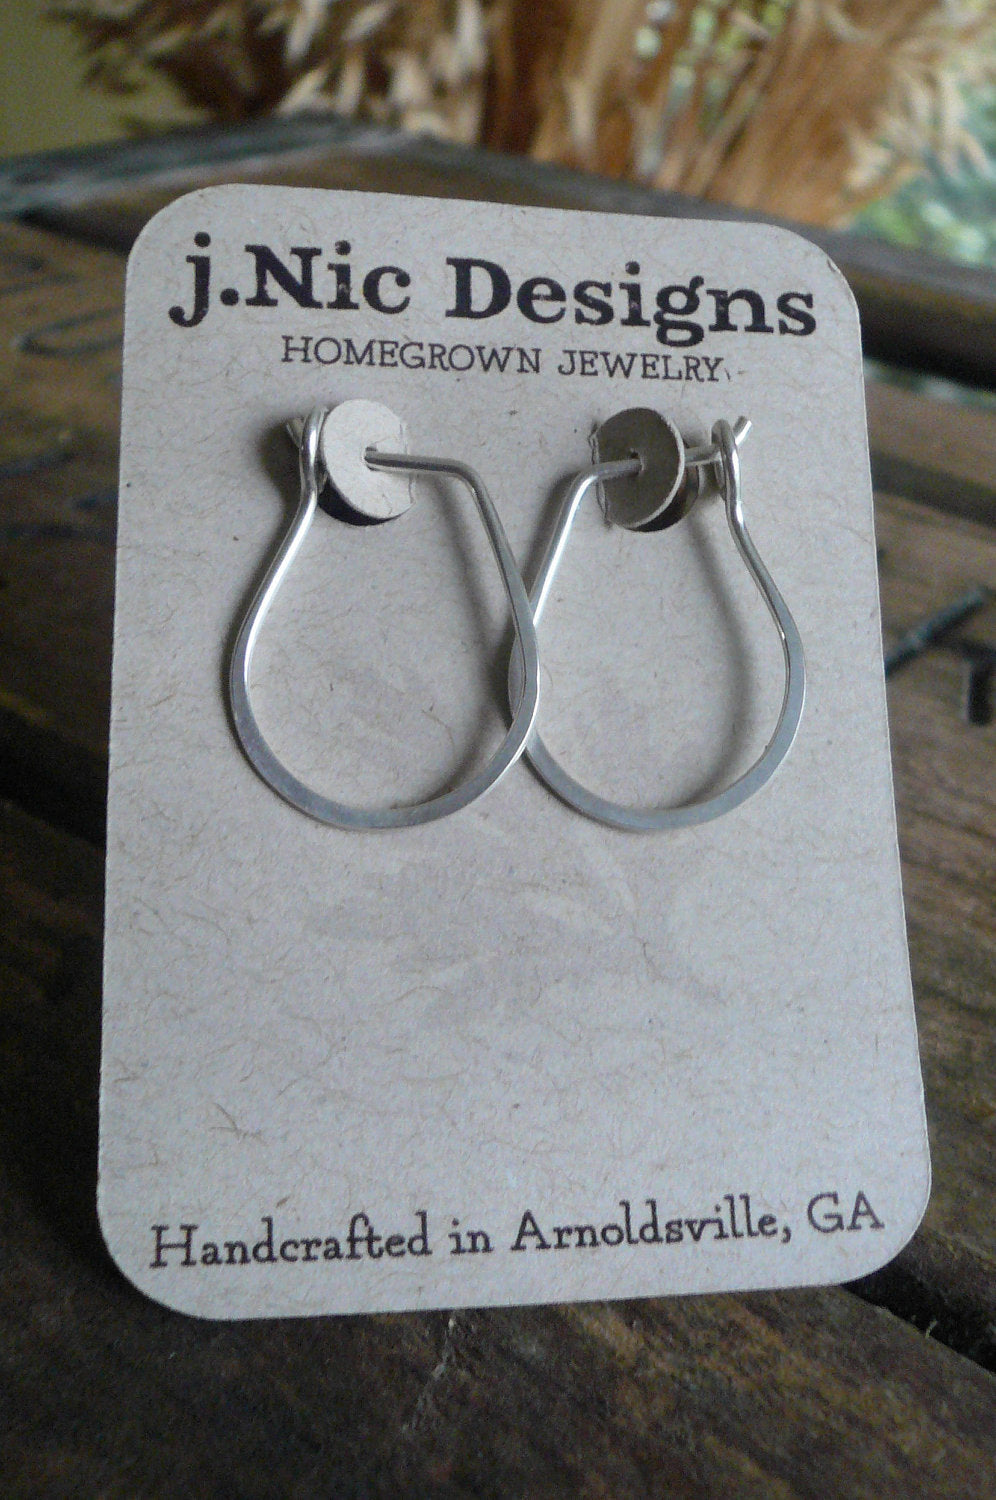 Hammered Pony Horseshoe Hoops - Handmade. Hand forged. Sterling Silver or 14kt goldfill Earrings